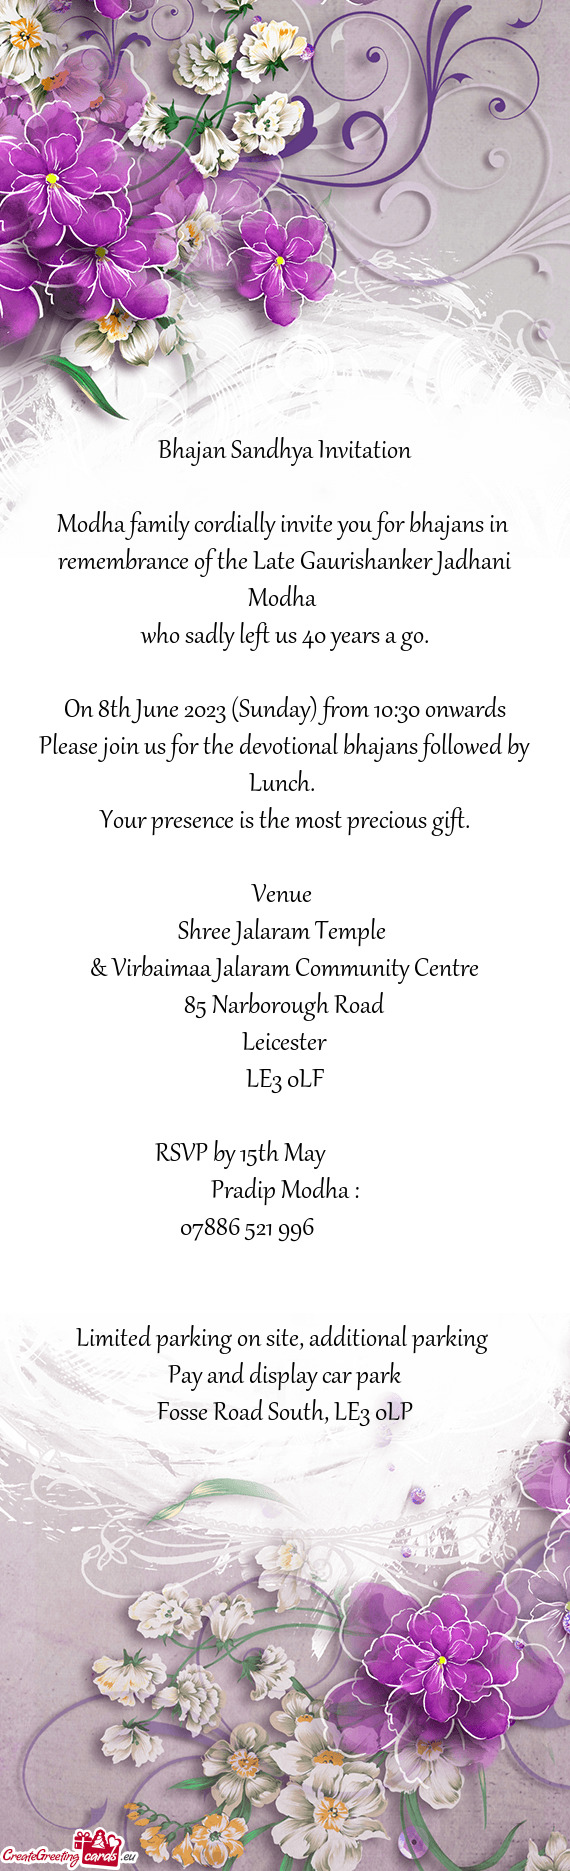 Modha family cordially invite you for bhajans in